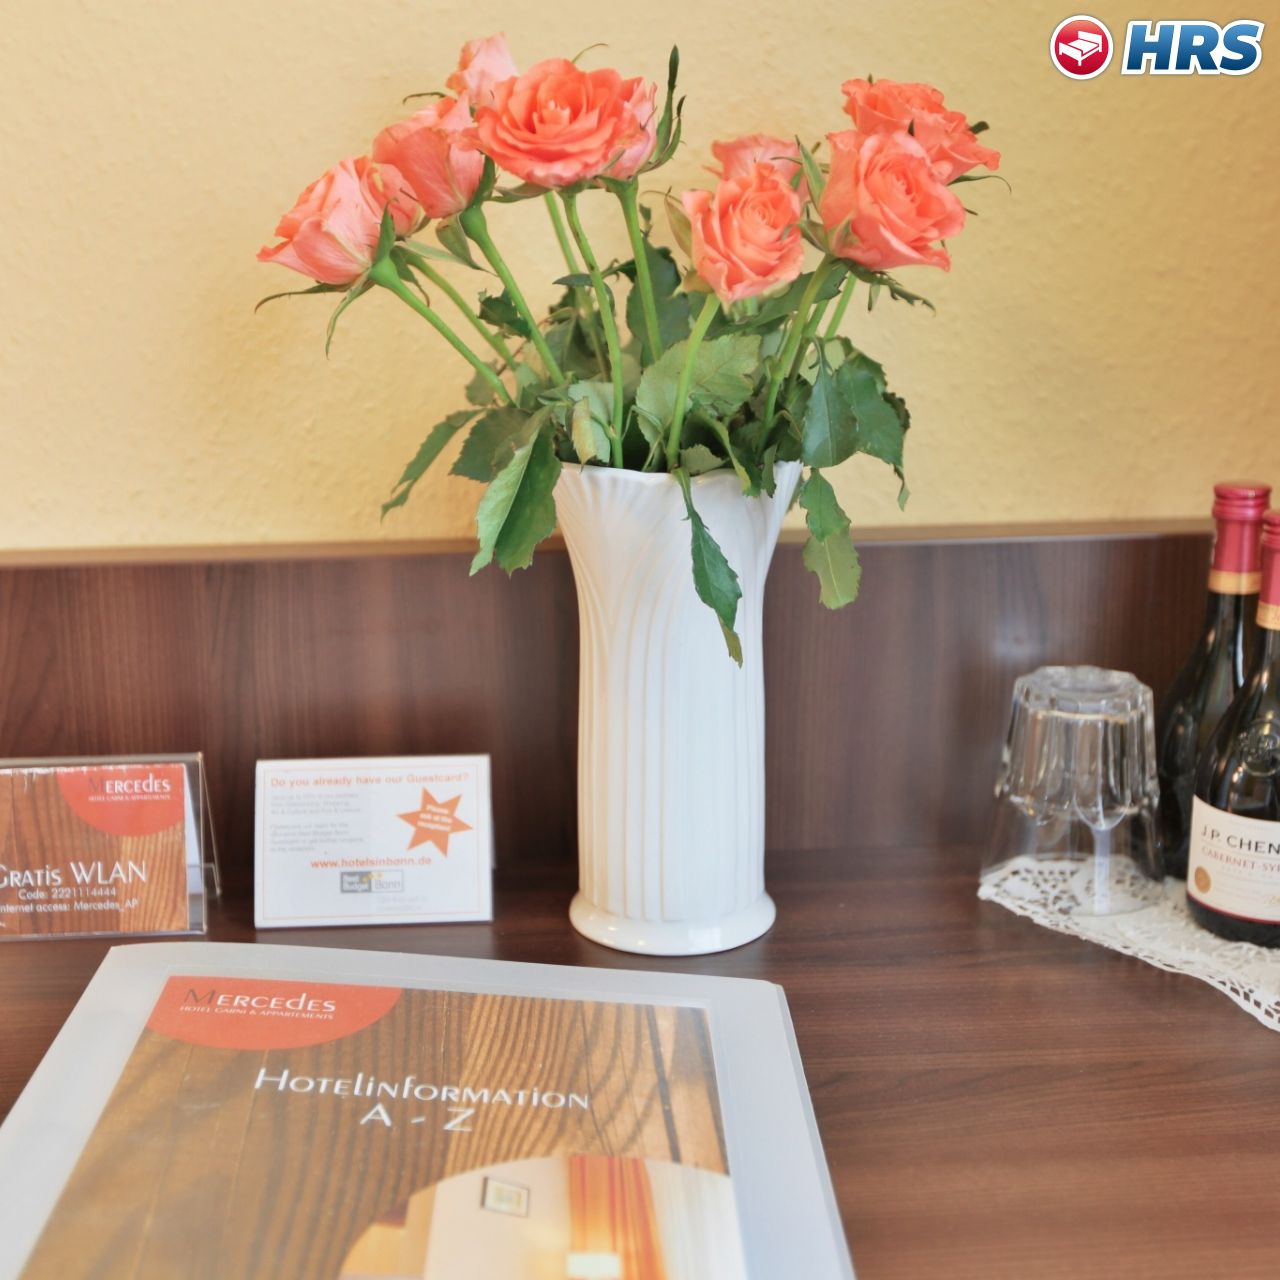 Mercedes Hotel & Apartments - Bonn - Great prices at HOTEL INFO